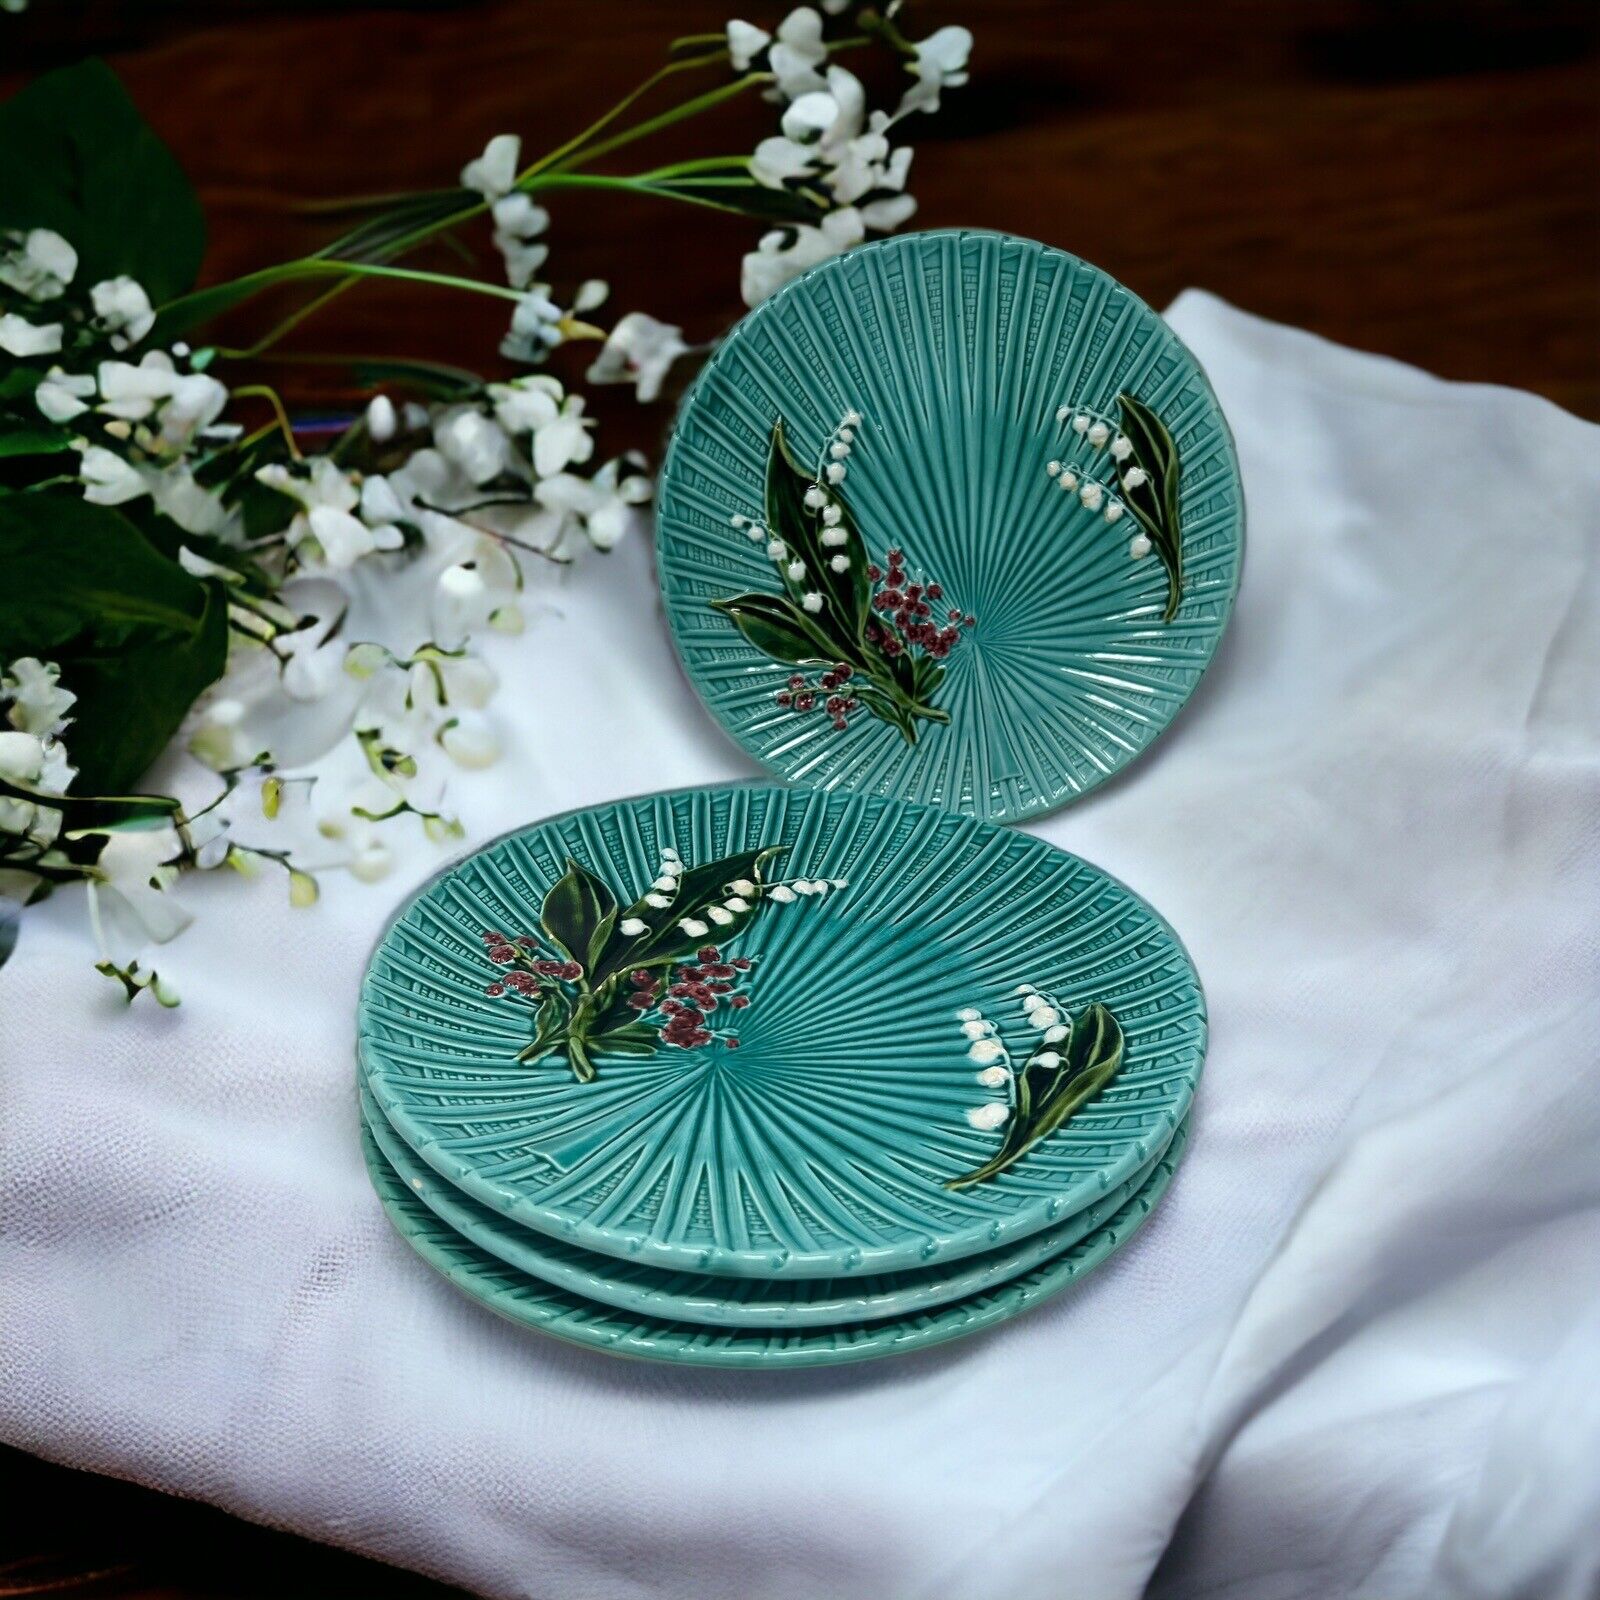 4 Antique 1920s Schramberg Majolica Lily of the Valley Green Plate Germany  11.5